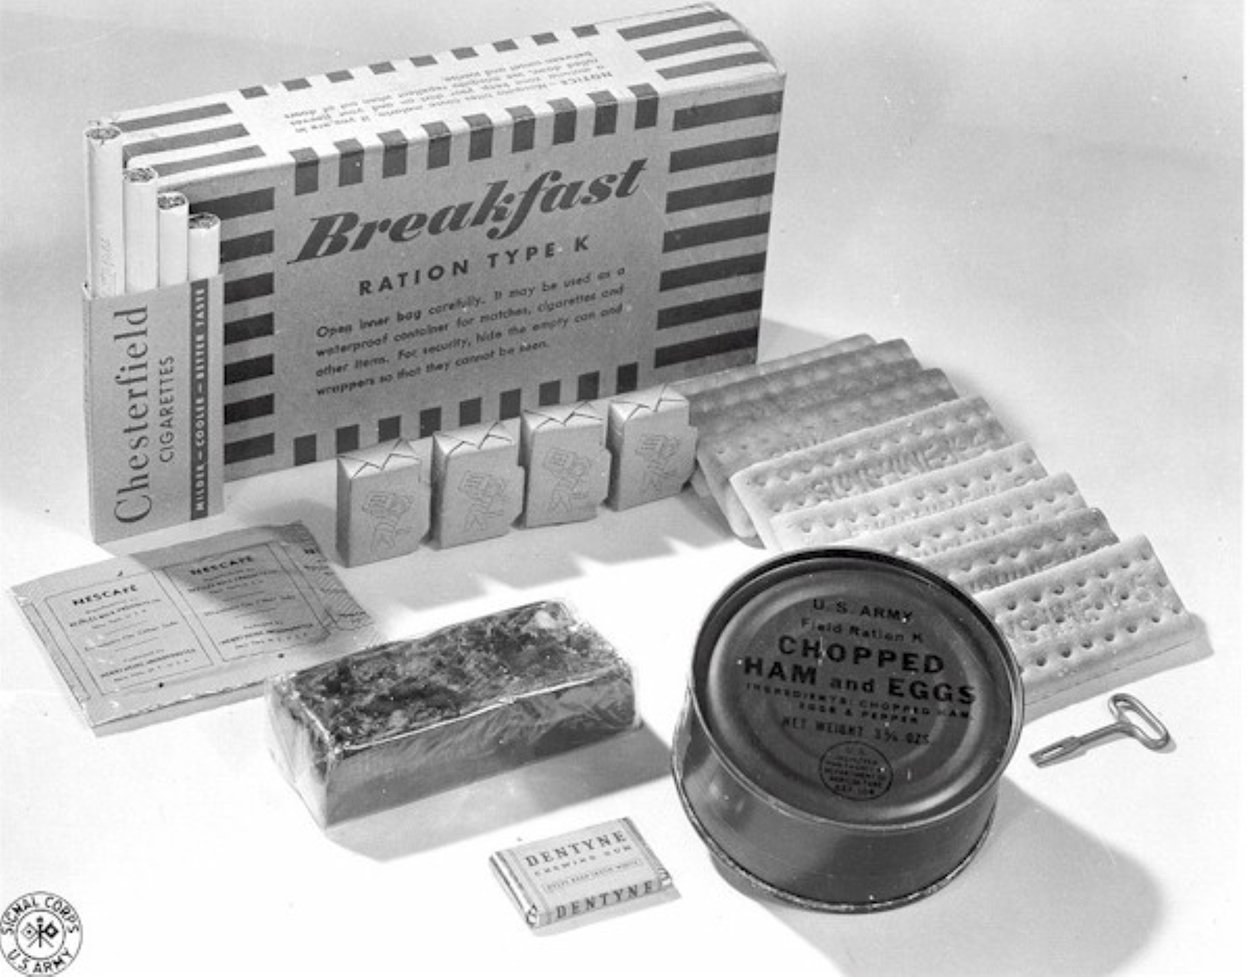 ww2 ration for soldiers